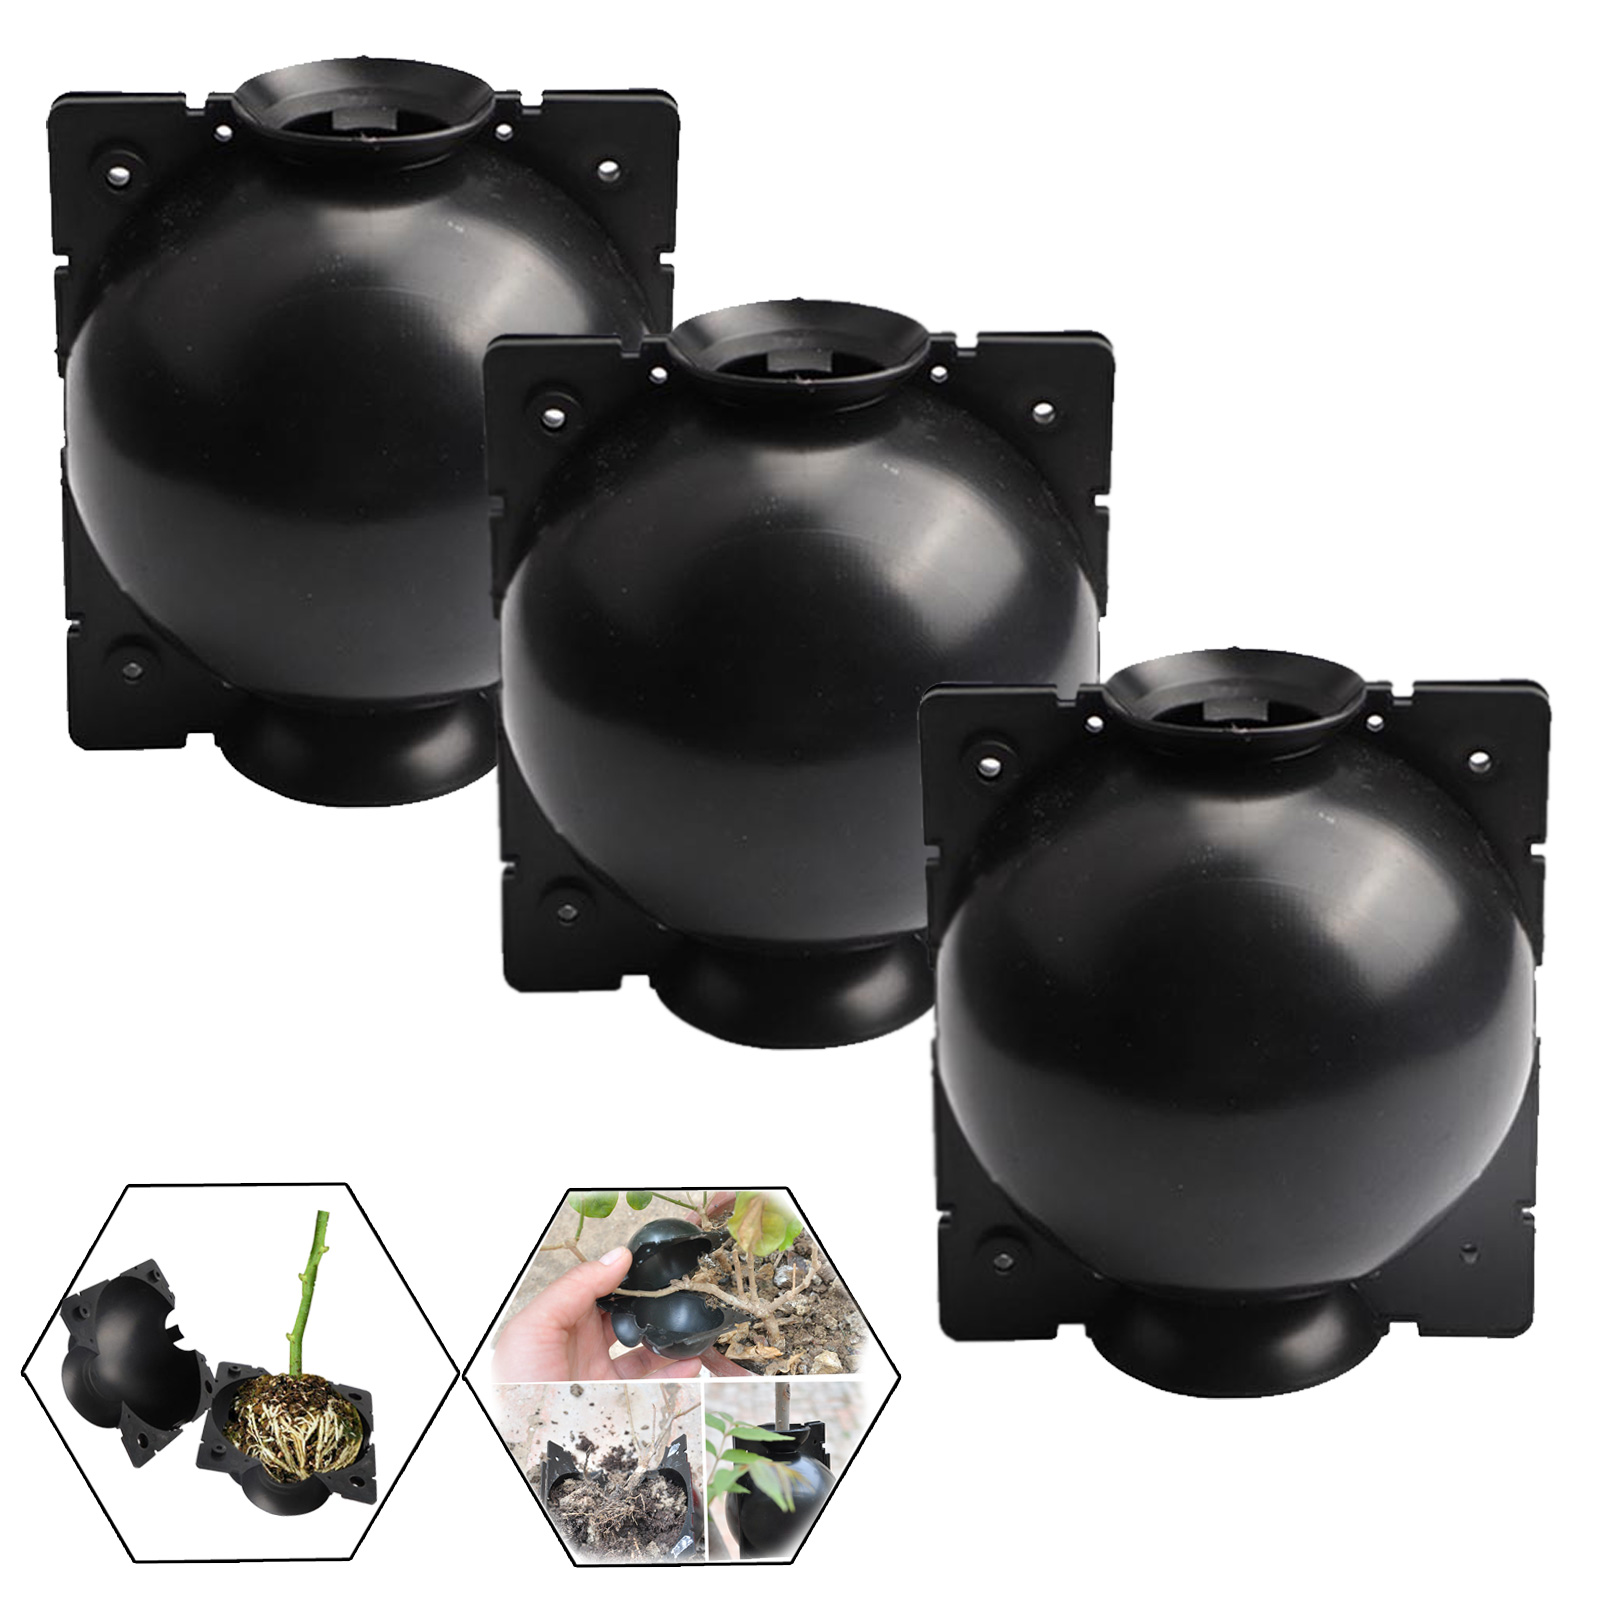 Plant Rooting Ball Black Plant Root Device Growing Box Assisted Cutting High-Pressure Propagation Ball, Reusable Grafting Controller Air-Layering for Plants Asexual Reproduction